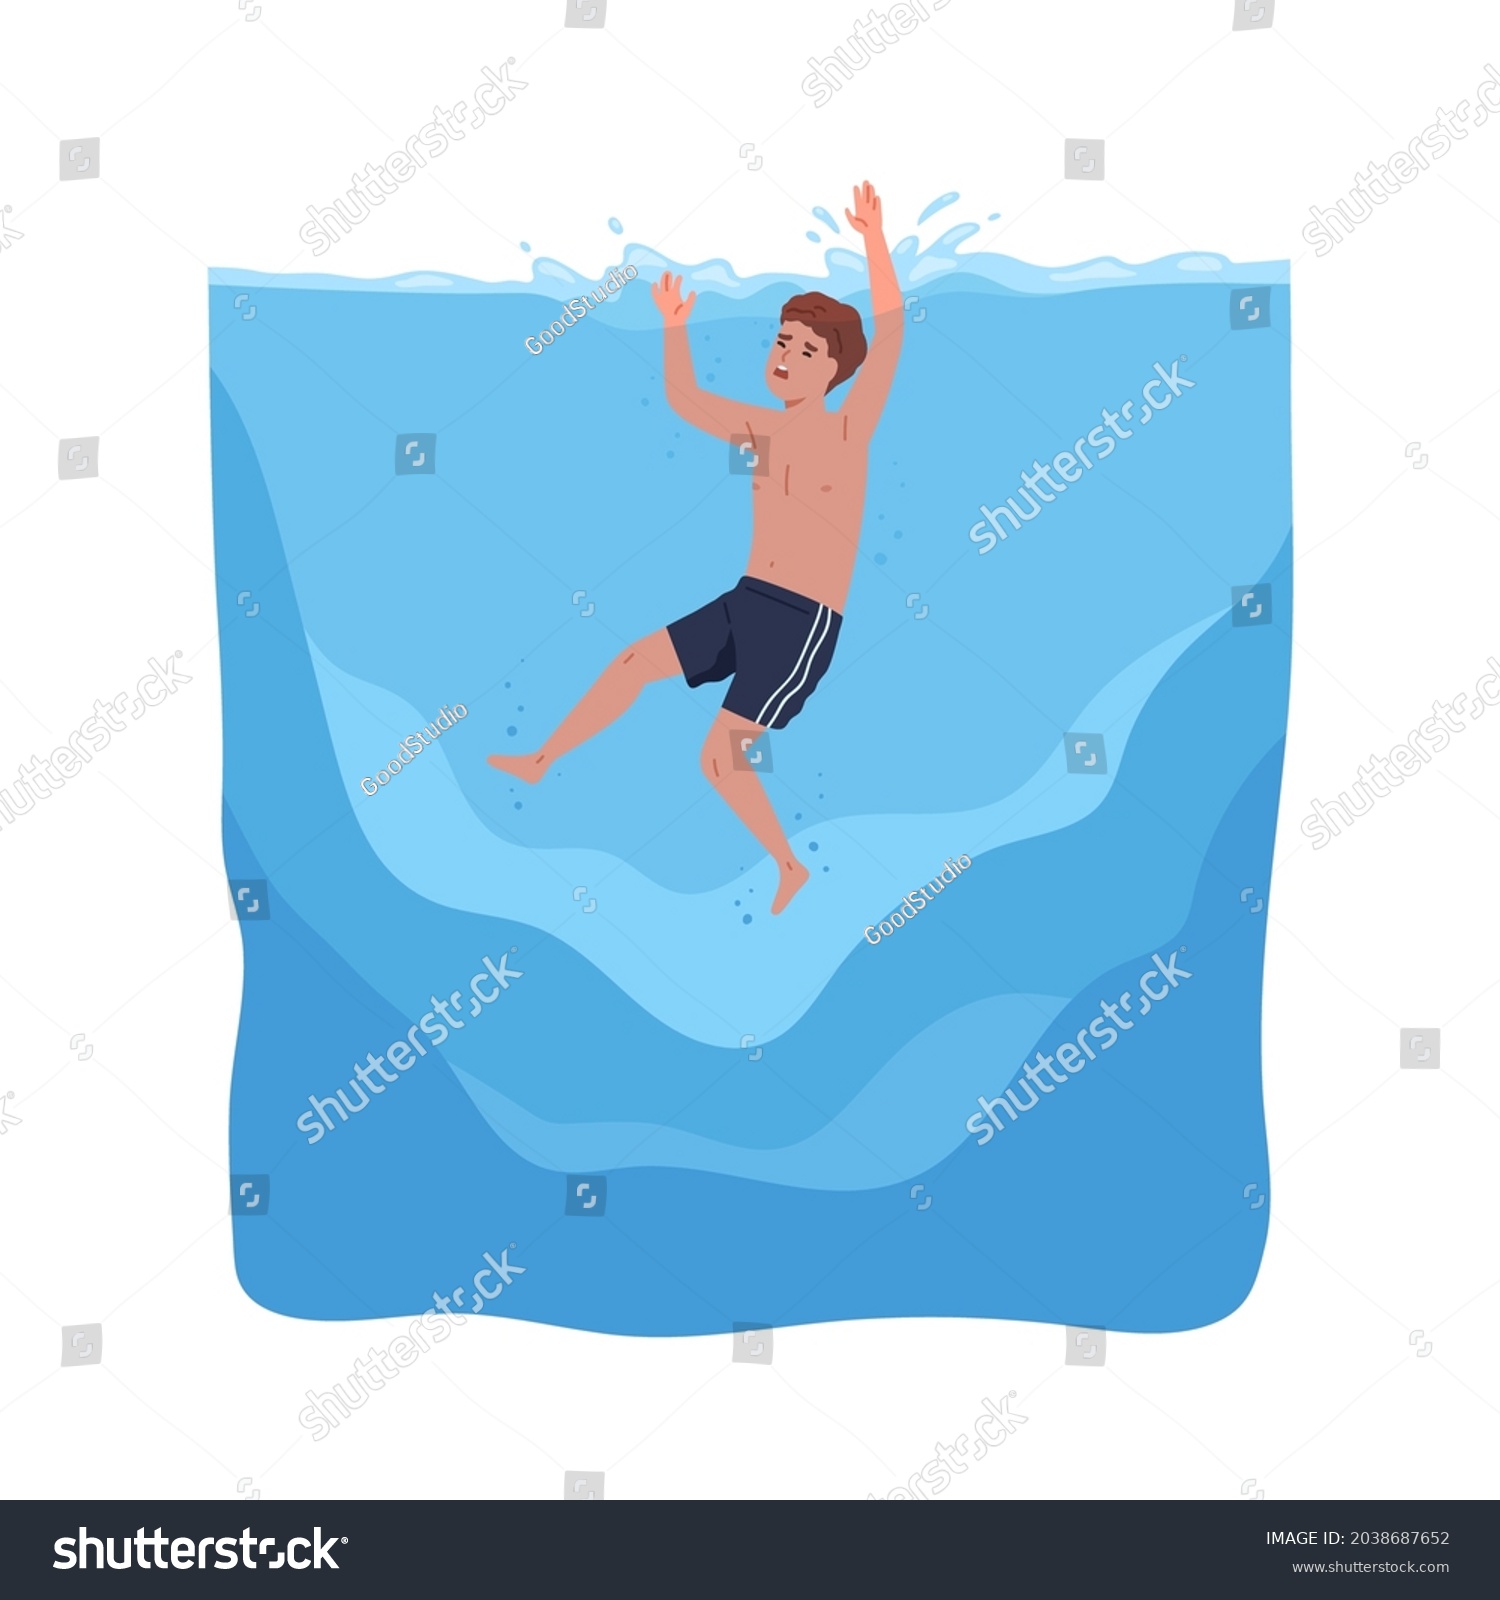 741 Sinking child Images, Stock Photos & Vectors | Shutterstock